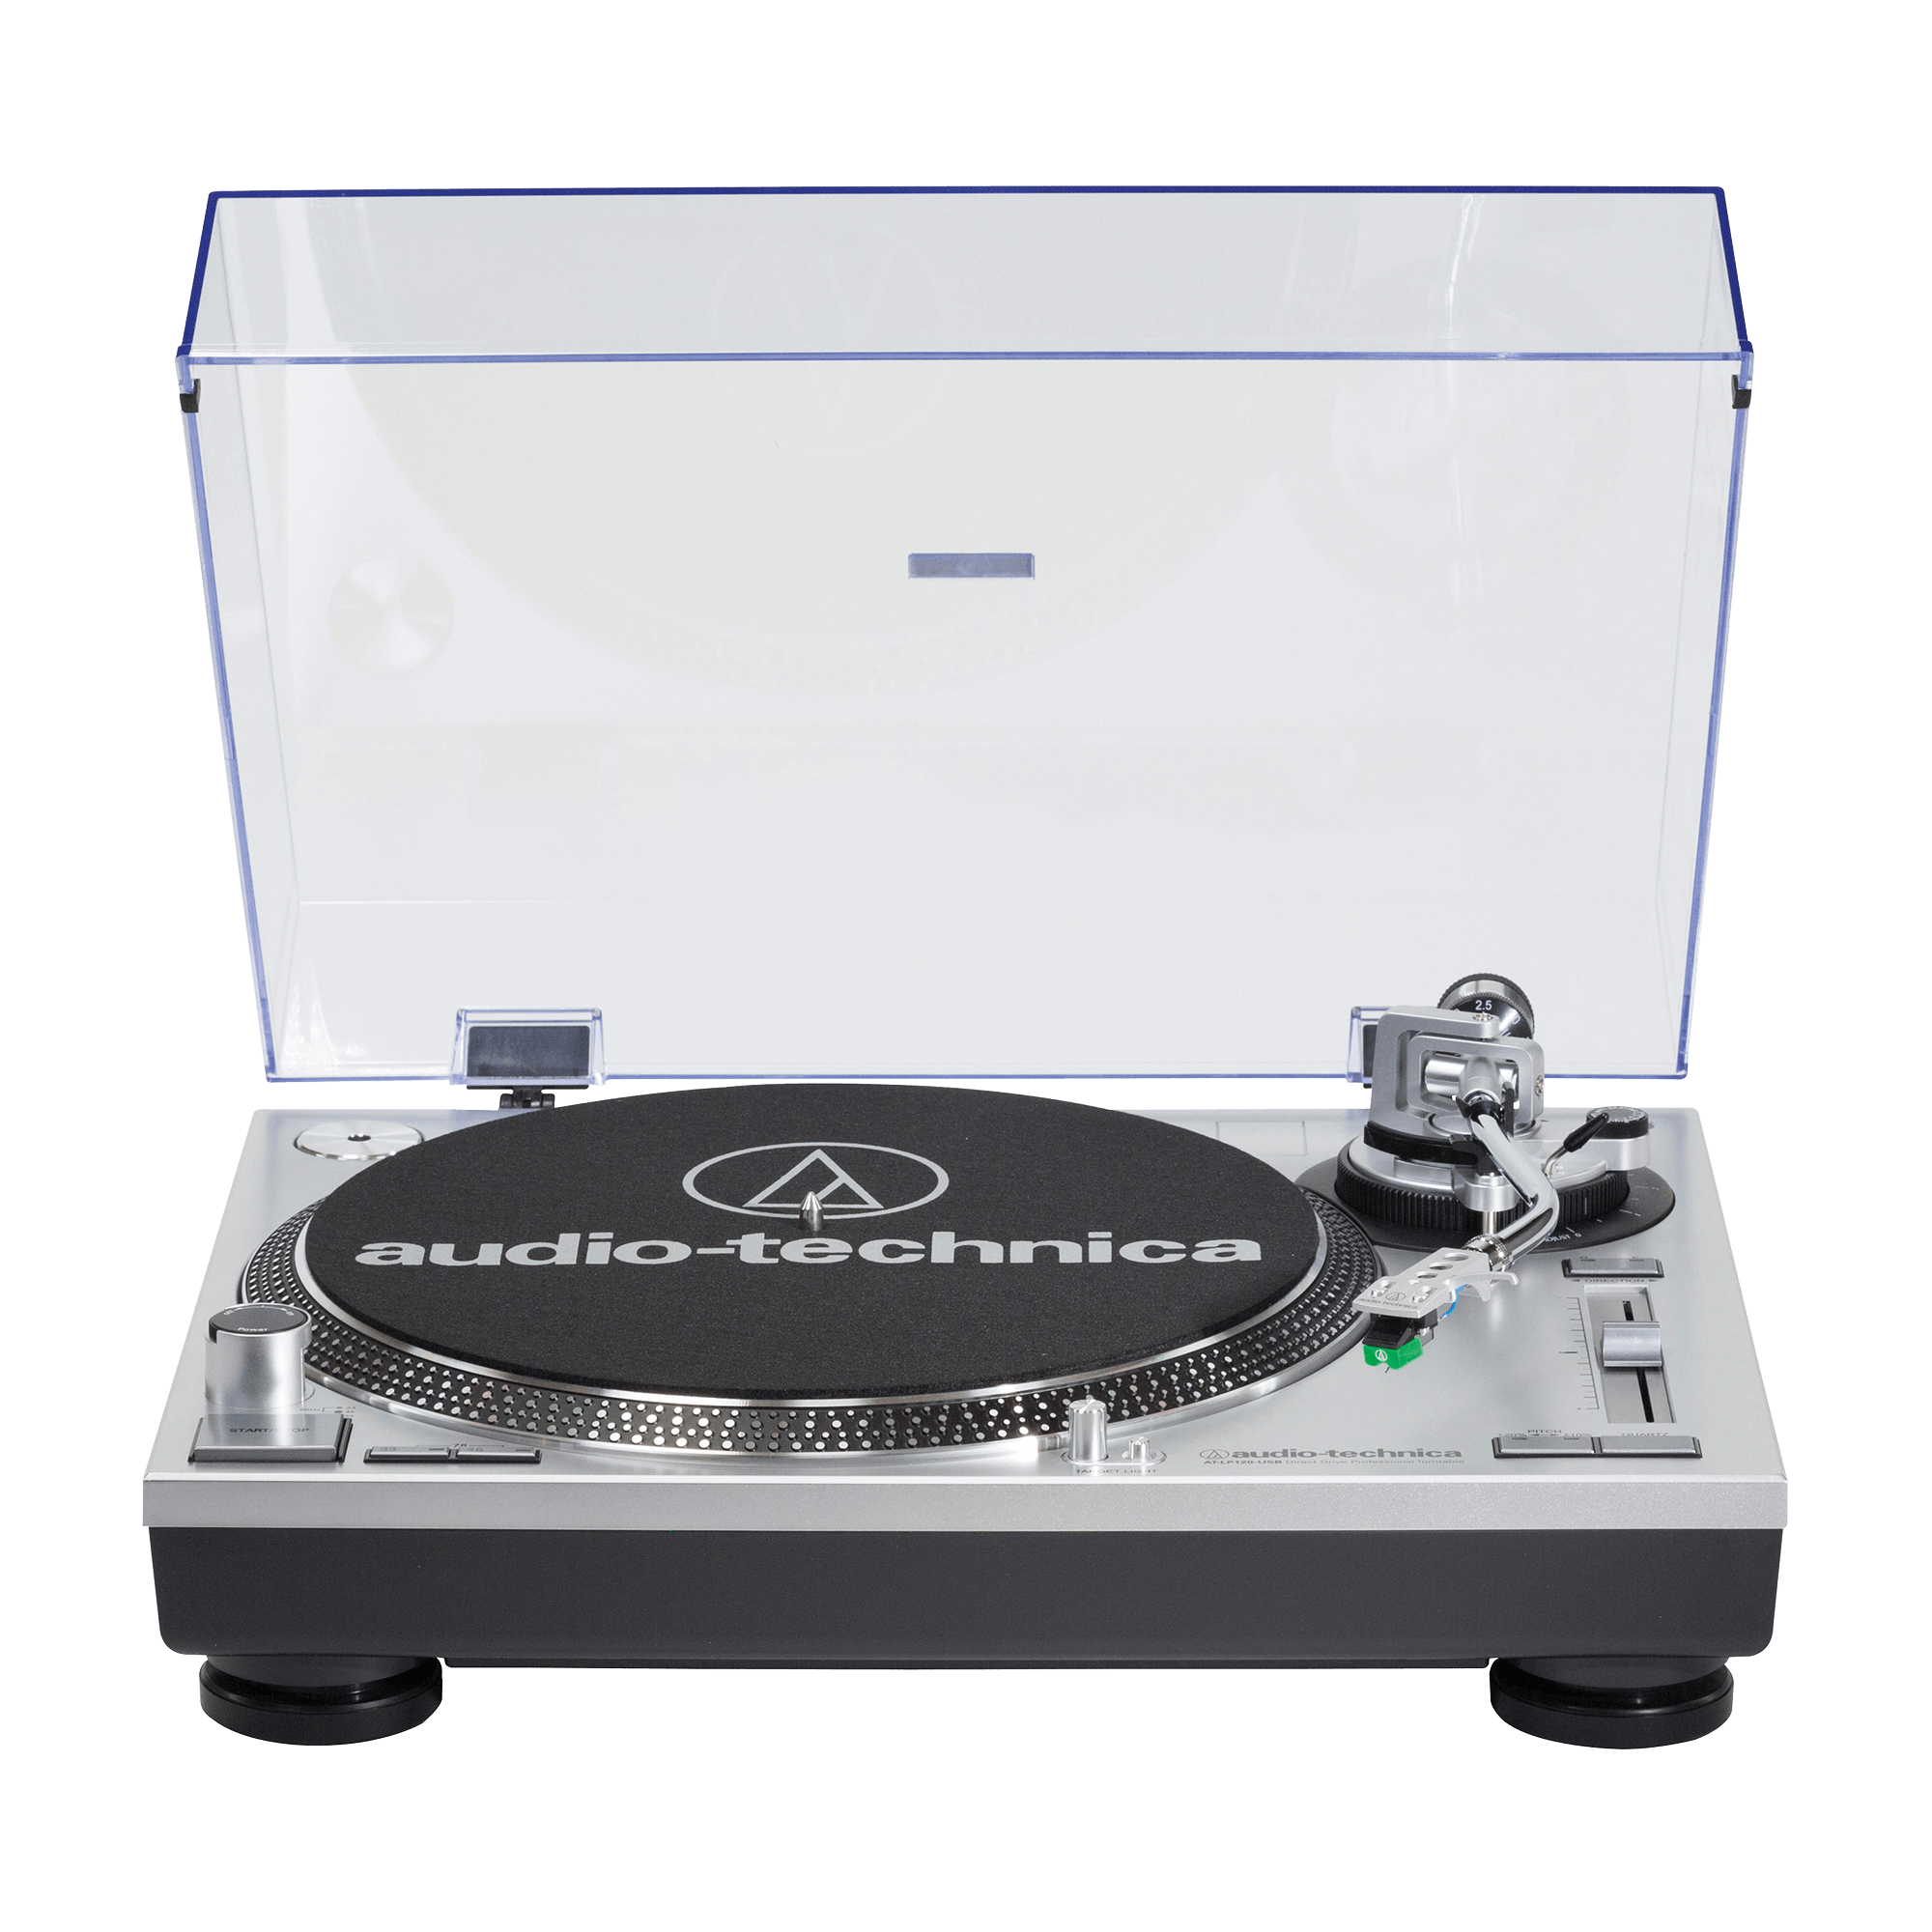 Audio Solutions Question of the Week: The AT-LP140XP, AT-LP120XUSB and AT- LP120-USB Turntables Look Very Similar. What are the Differences Between  These Models?